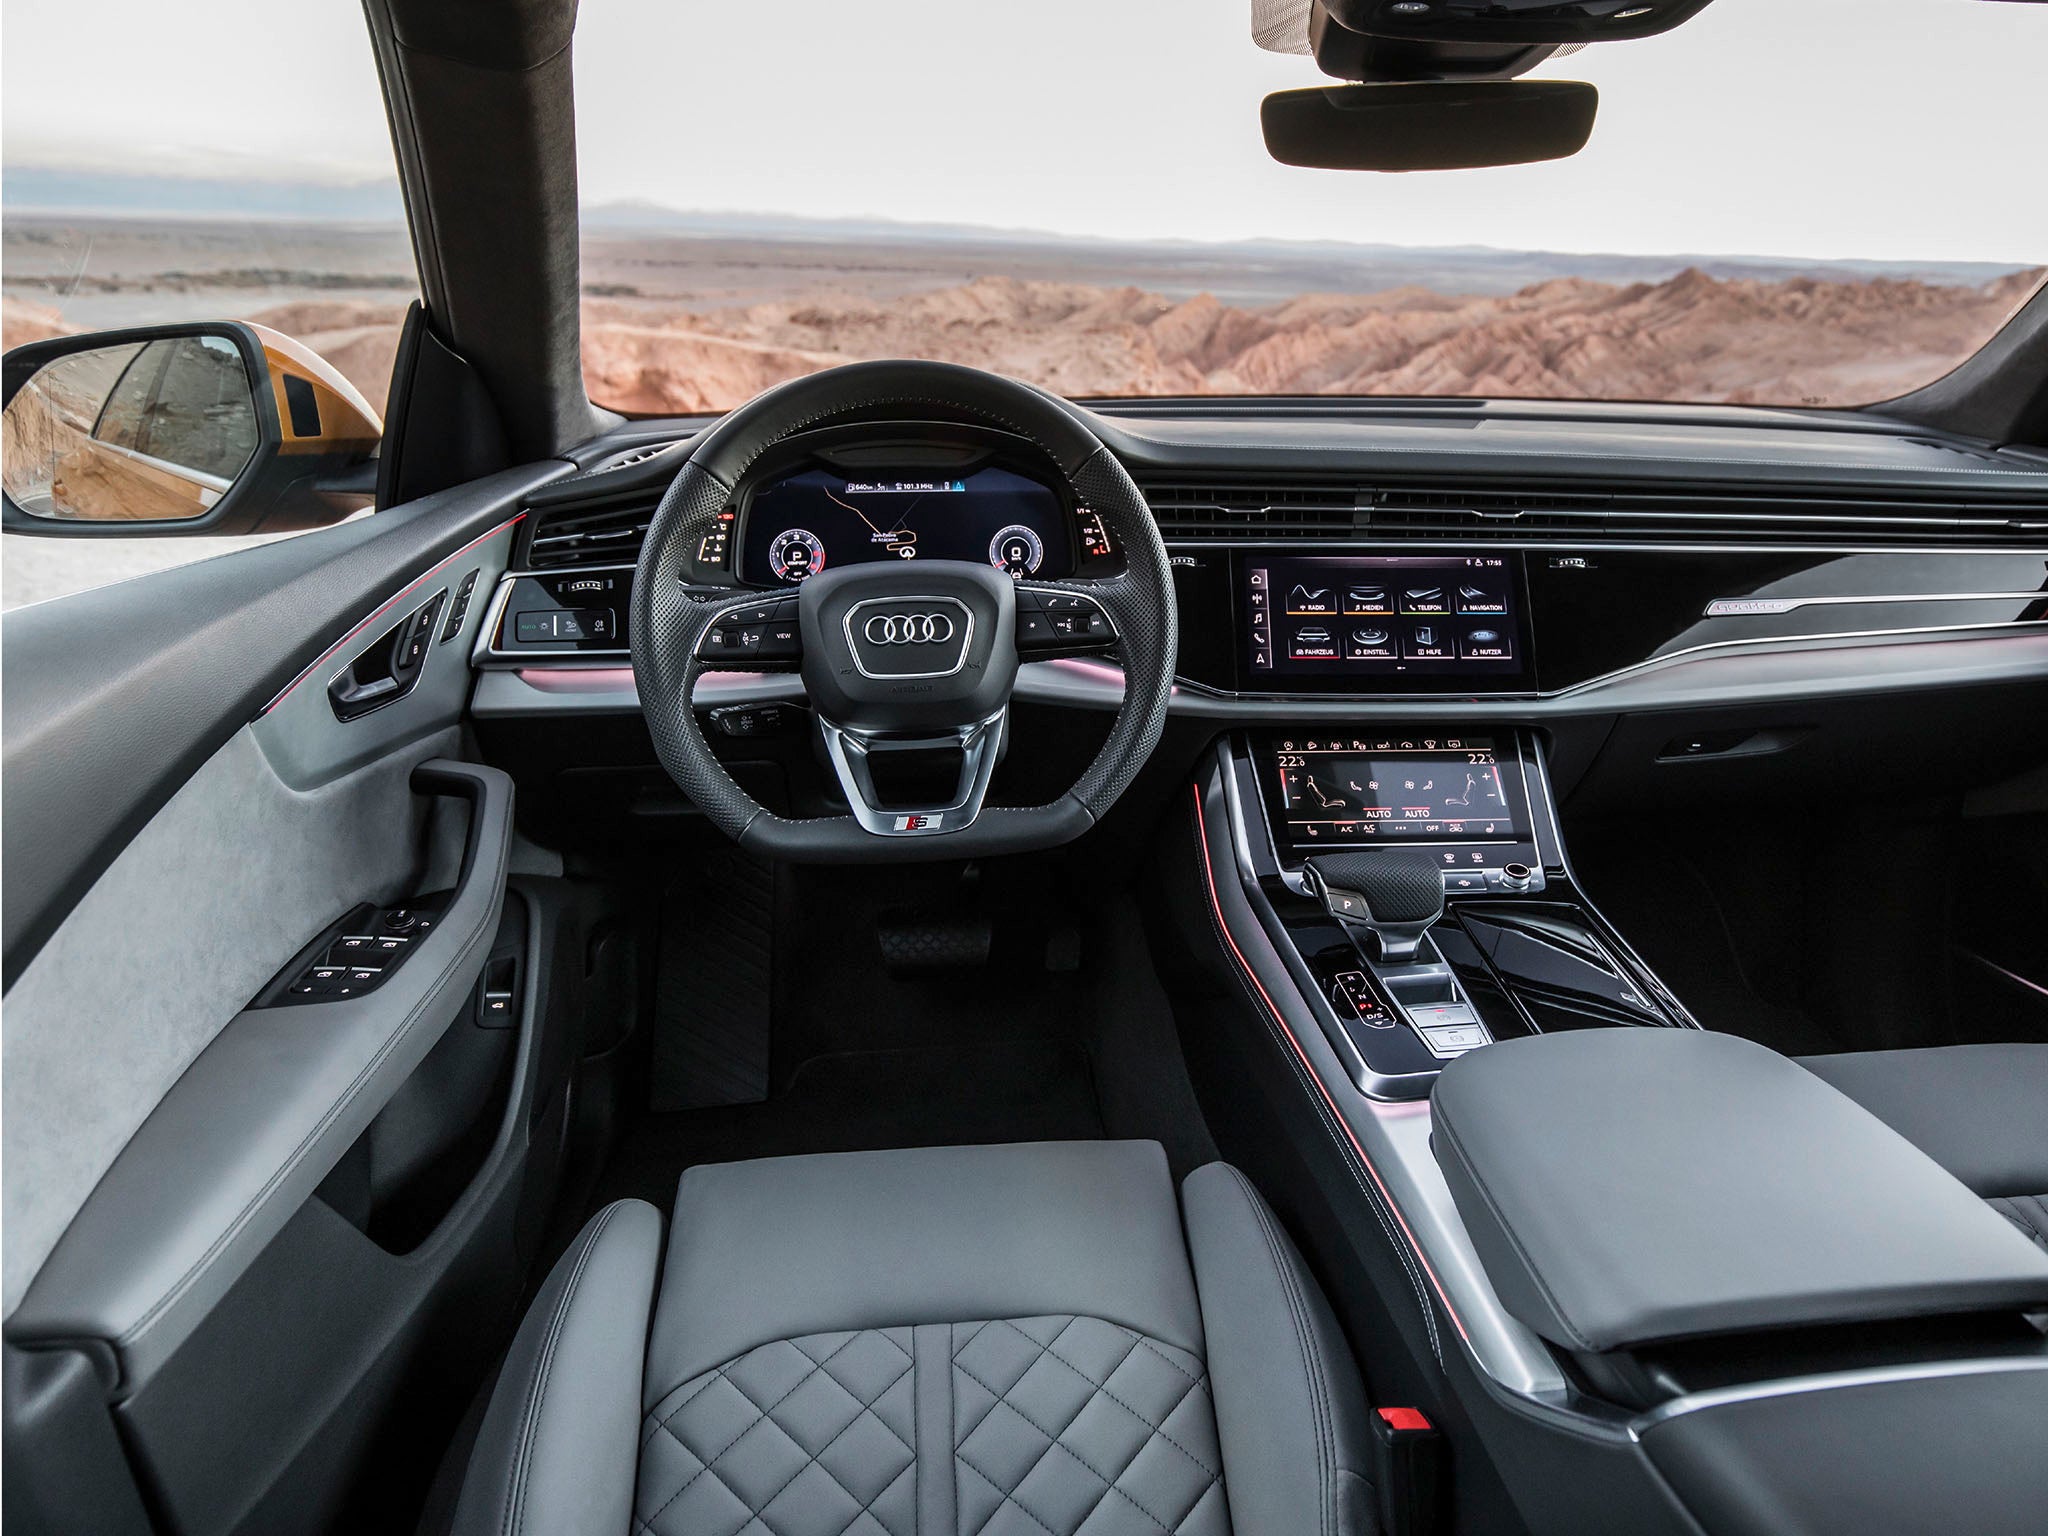 While the exterior of the Audi Q8 is challenging, its interior is a classy and entertaining affair